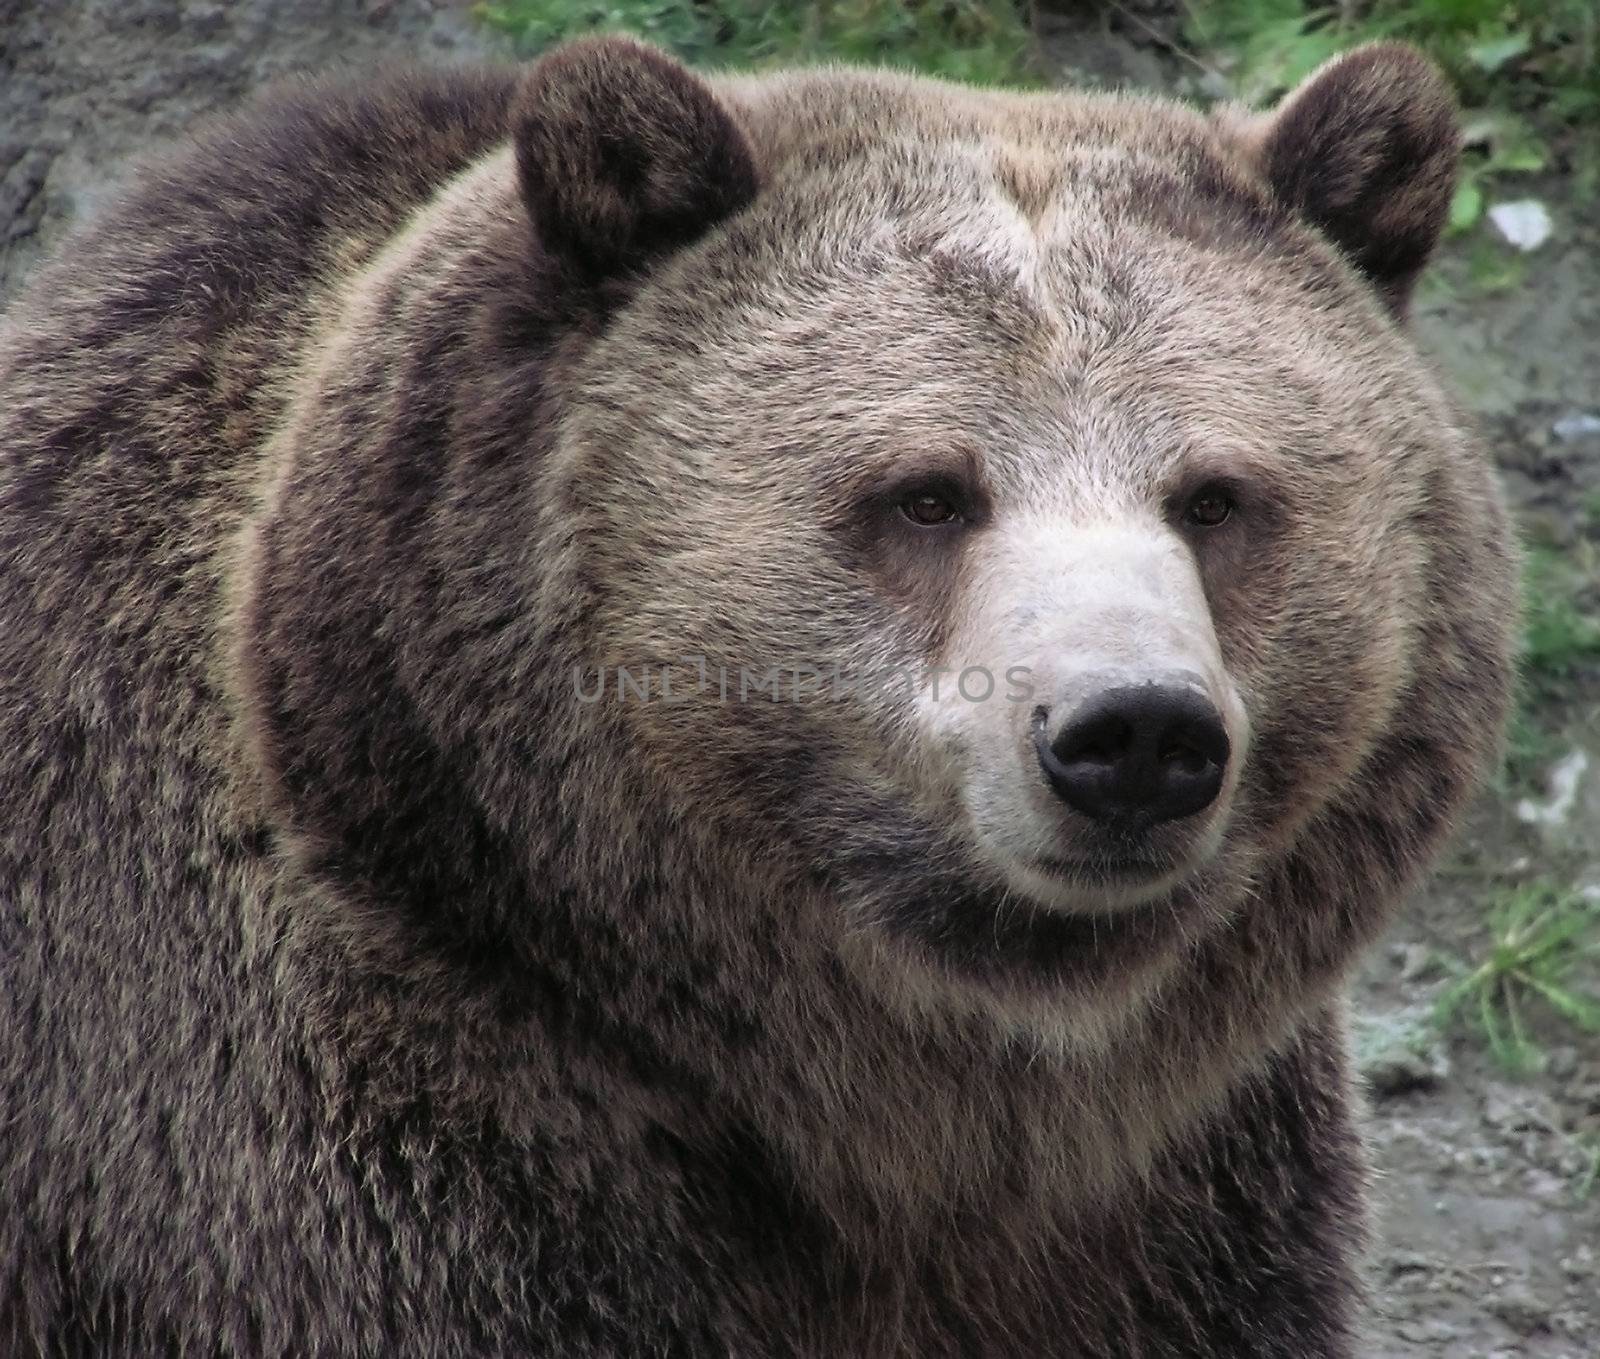 Close-up of a female Grizzly bear by Mirage3